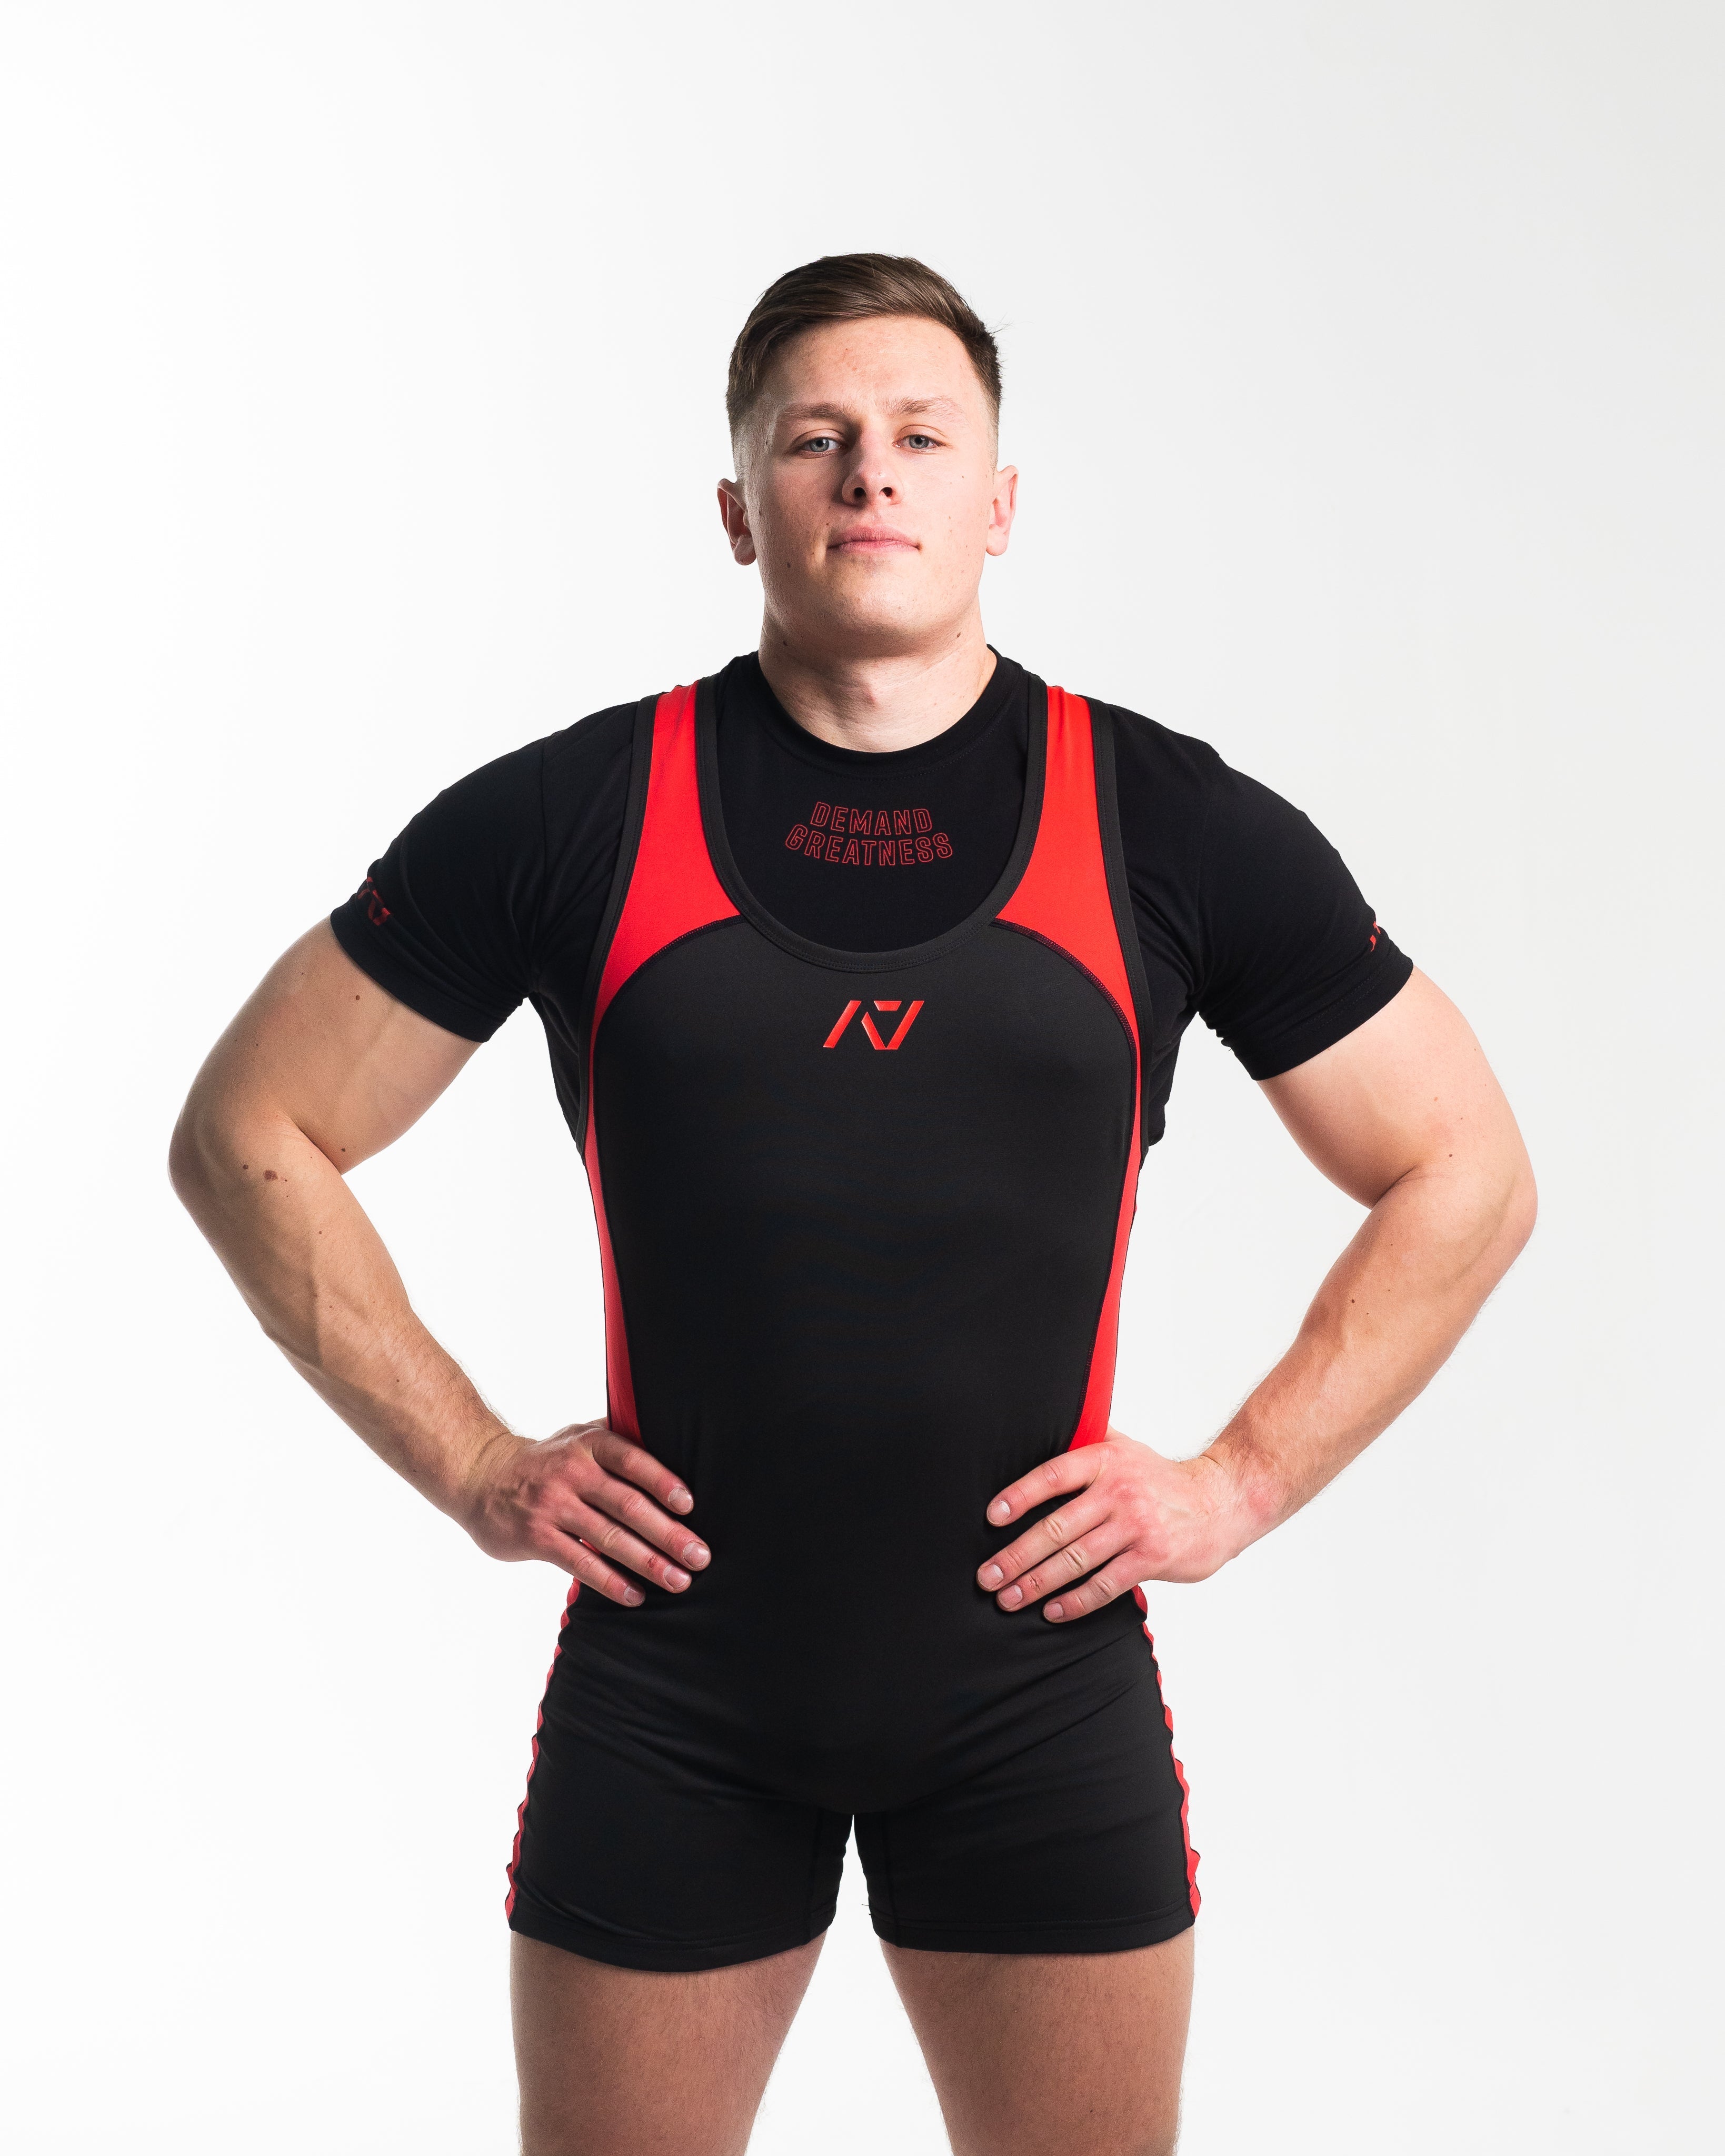 Singlets - IPF Approved – Tagged size-4xl – A7 UK